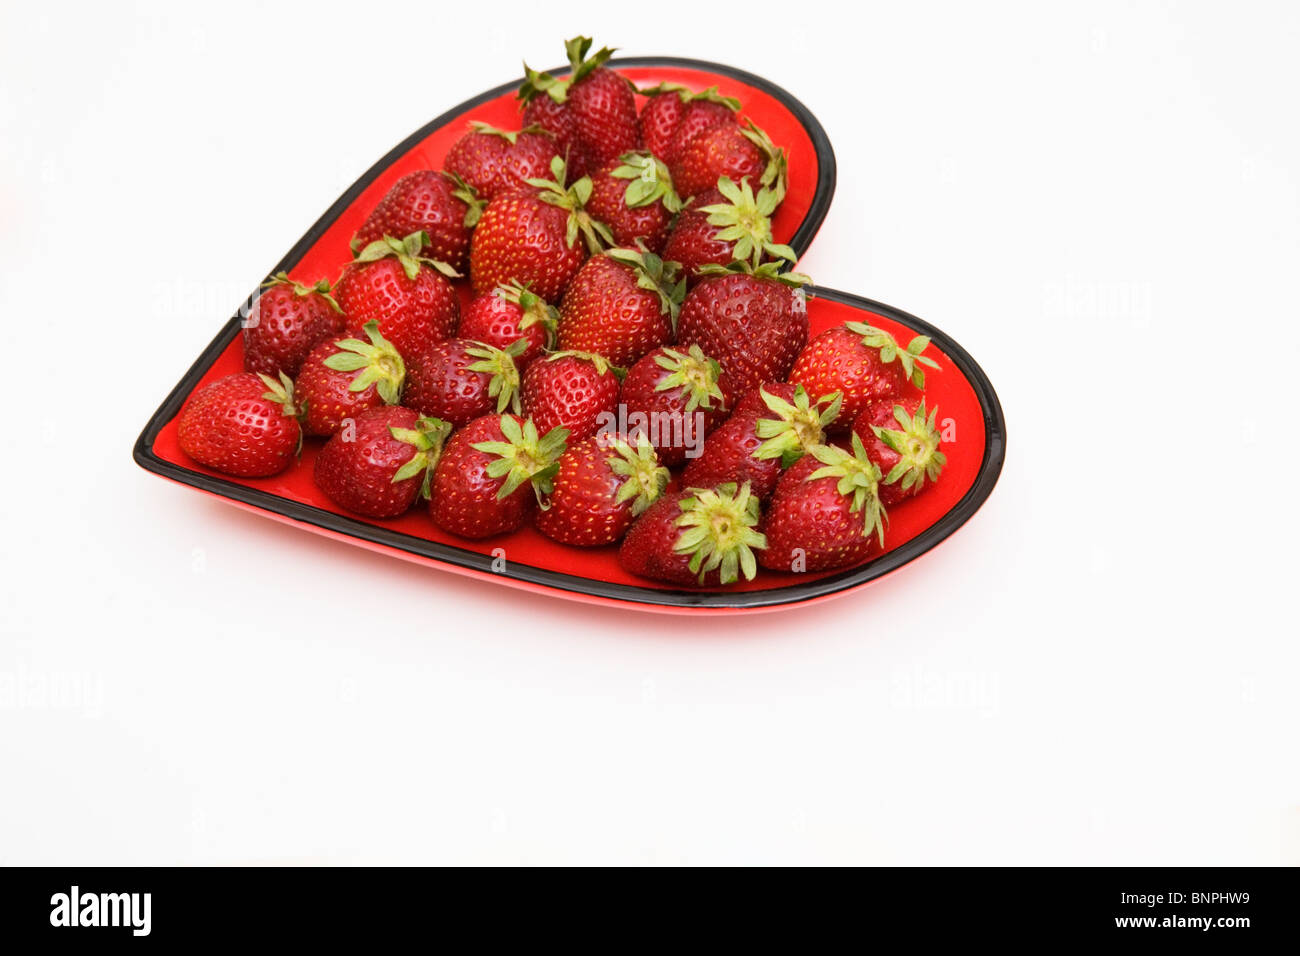 A heart shaped plate of fresh strawberries Stock Photo